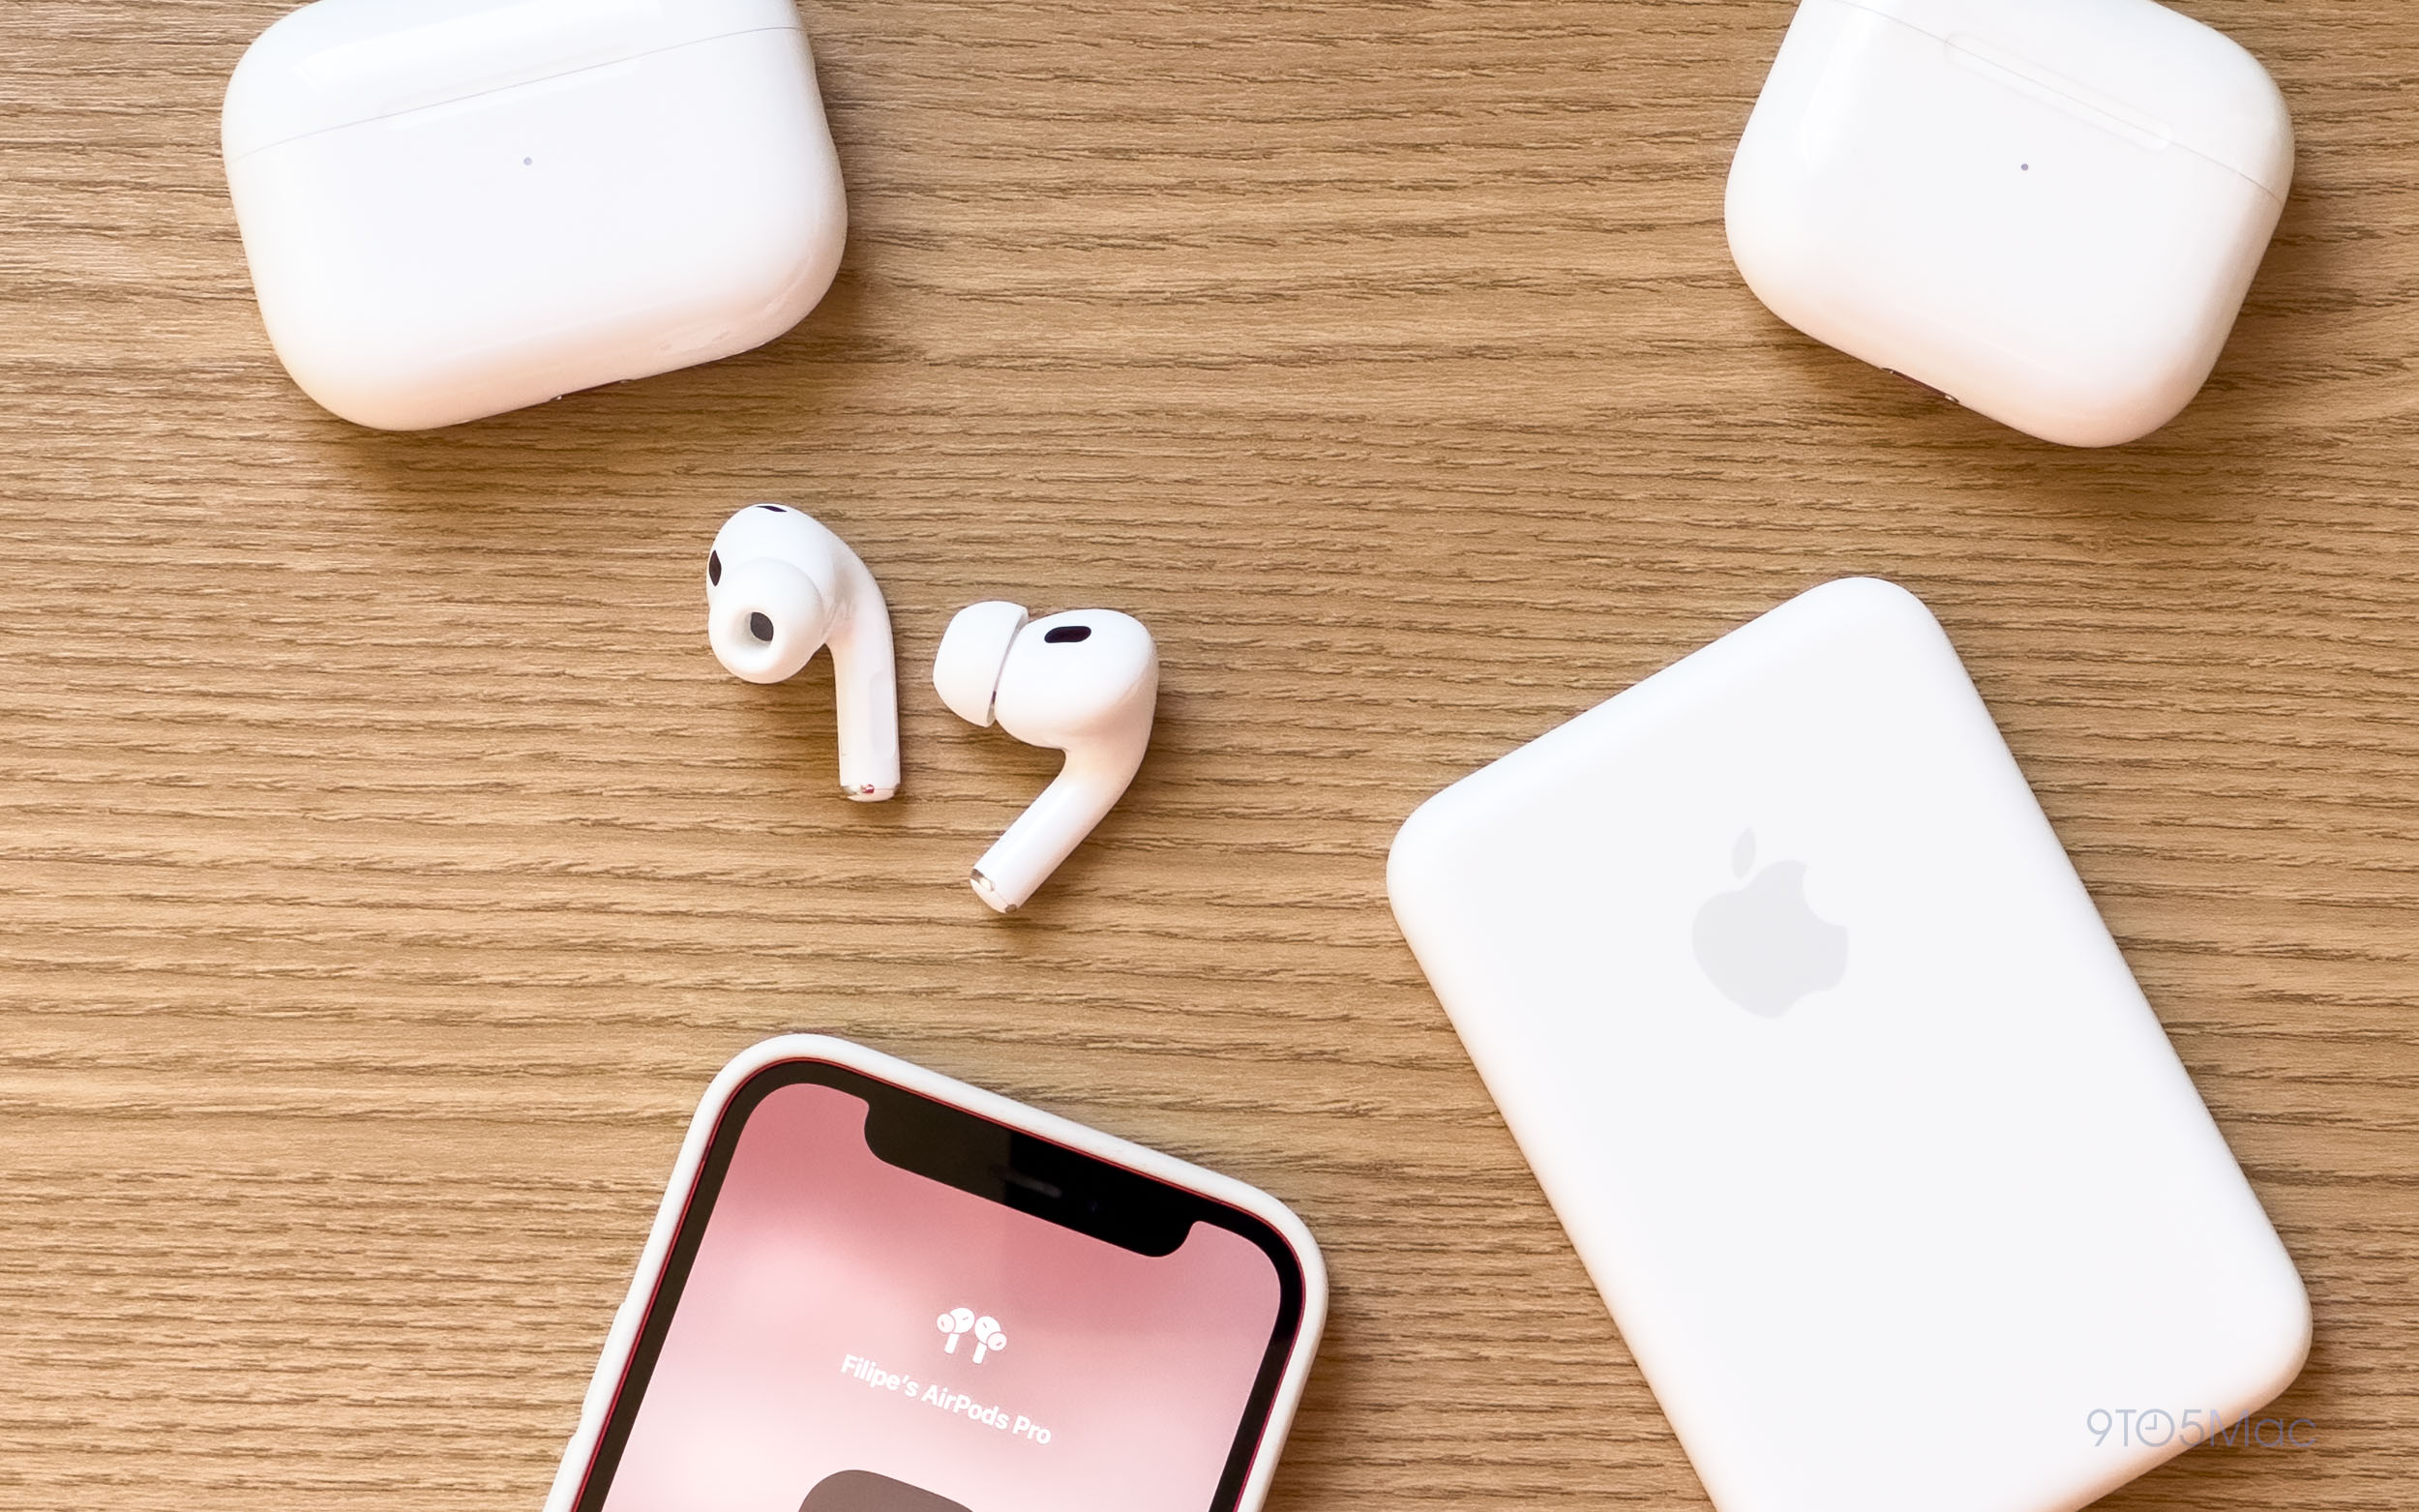 Apple AirPods and other Bluetooth accessories